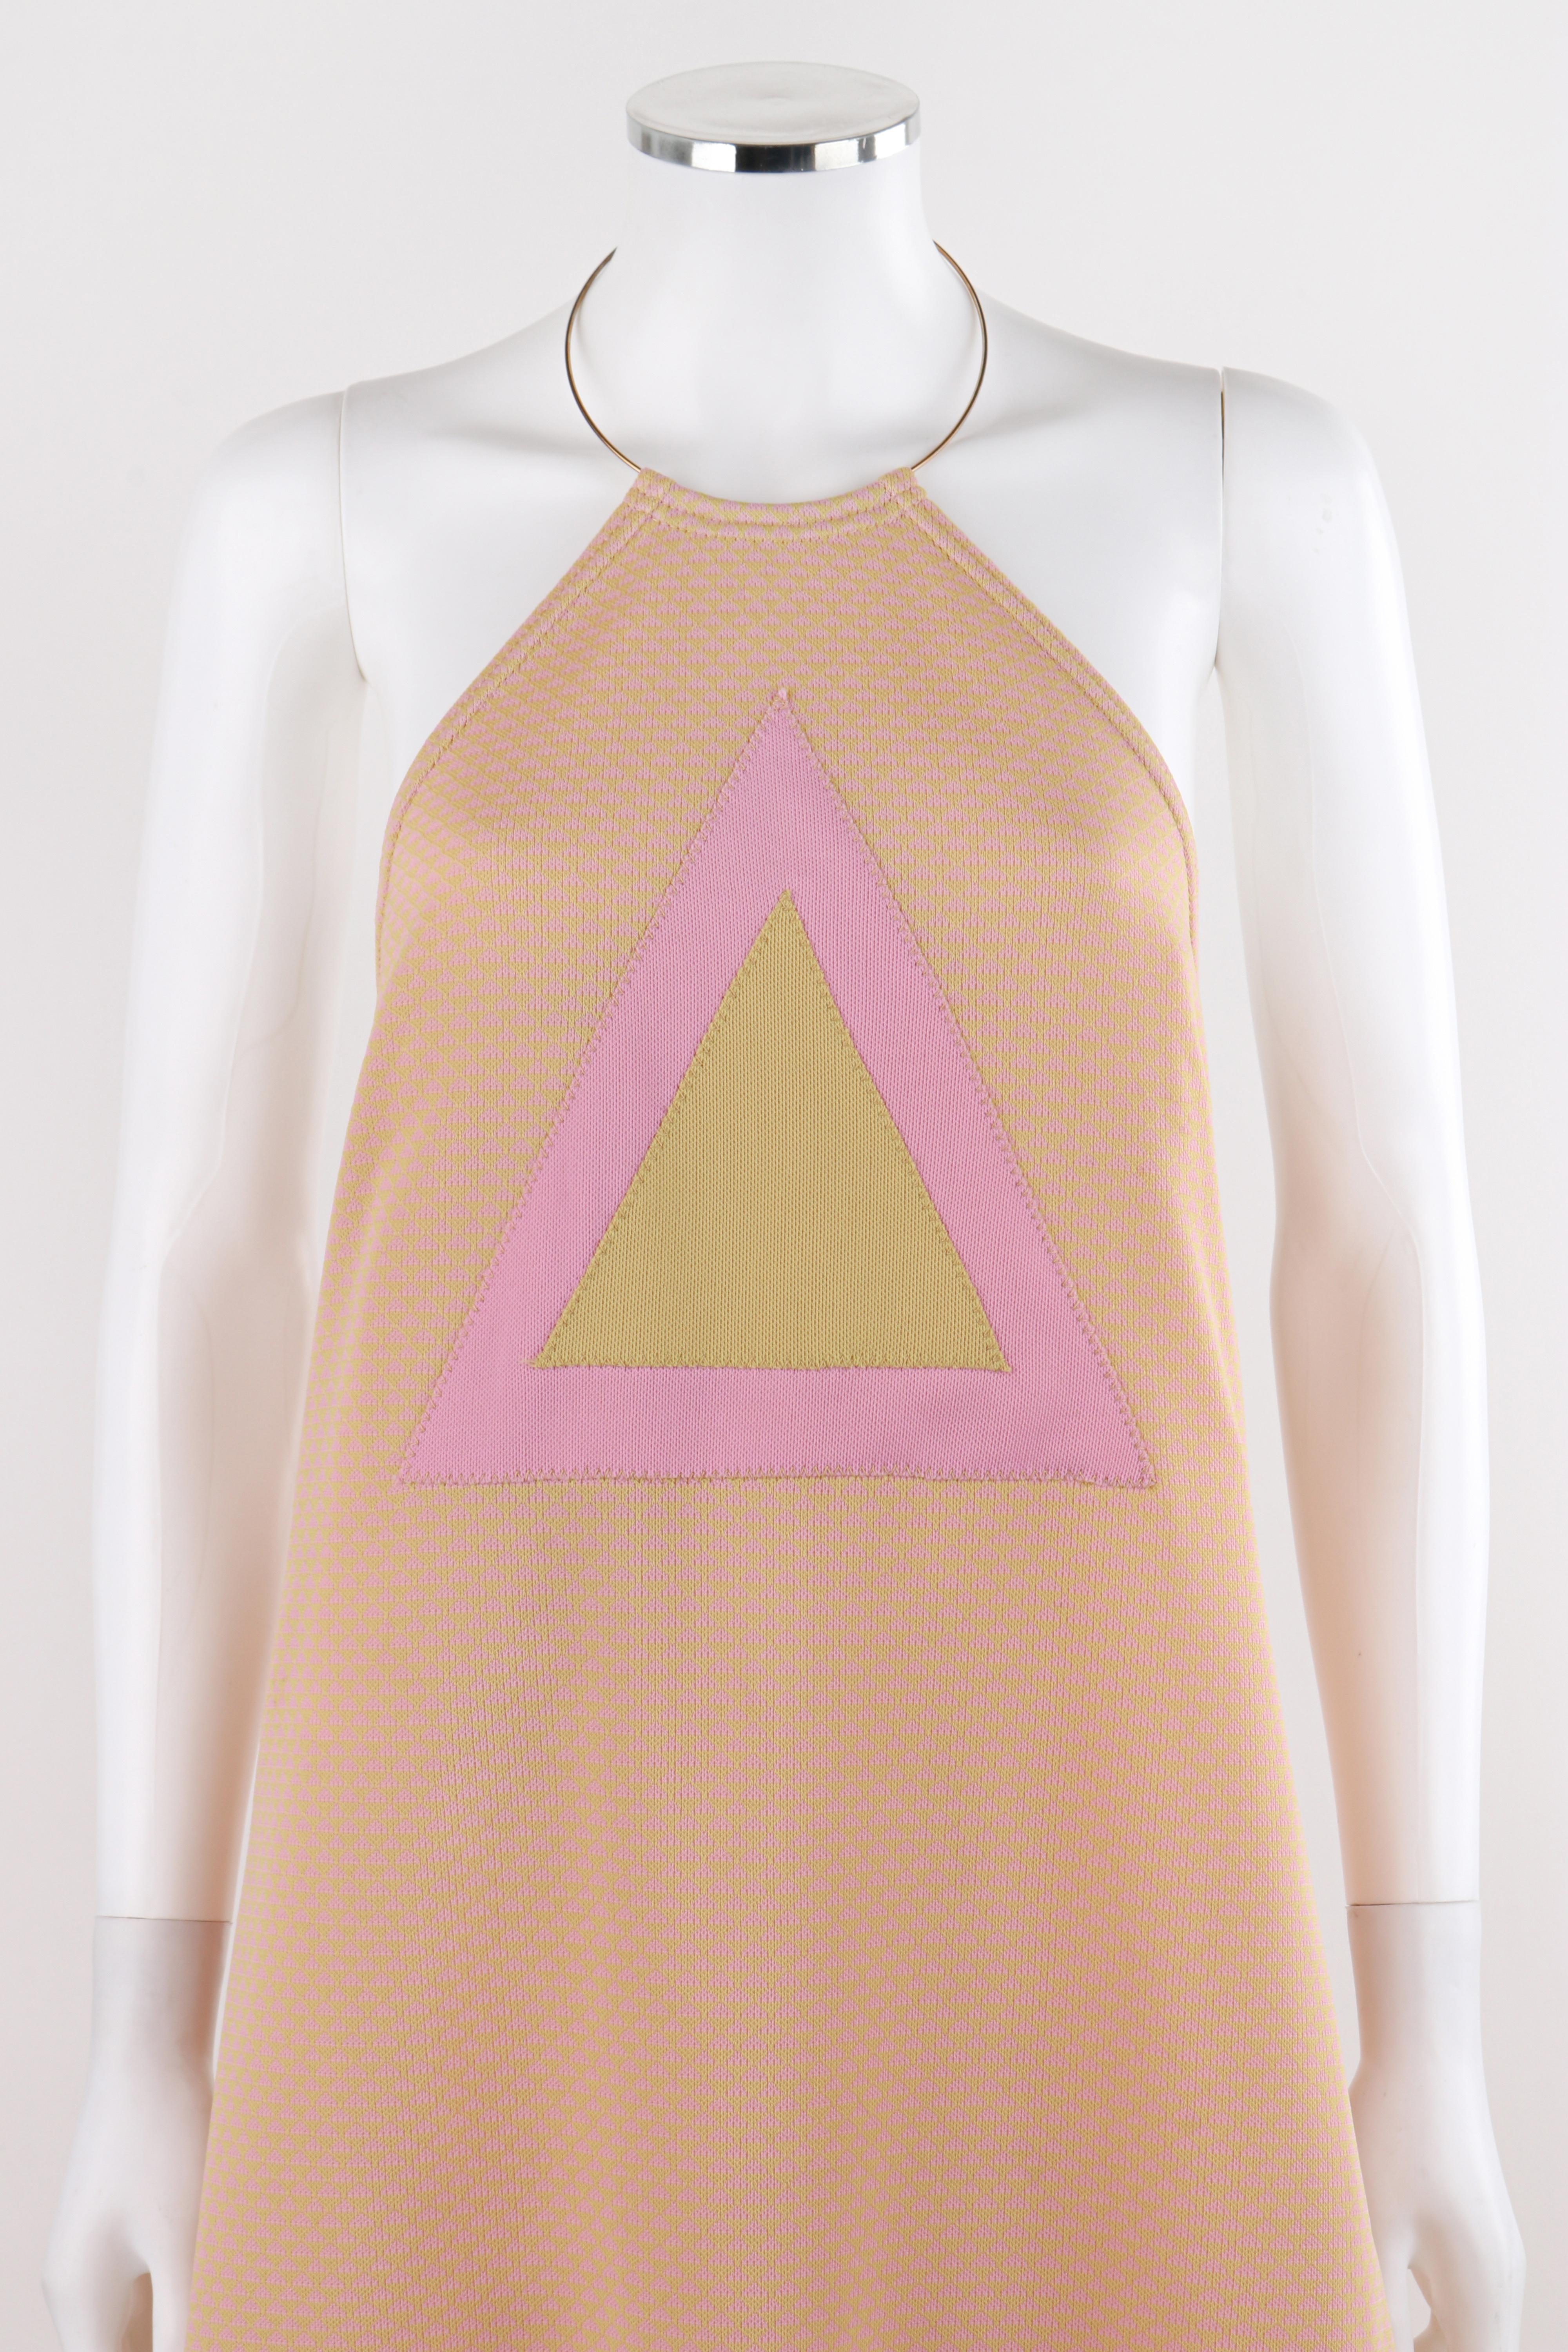 RUDI GERNREICH c.1970 Pink Yellow Triangle Knit Choker Necklace  Halter Top Dress - New Old Stock

Circa: 1970
Label(s): Rudi Gernreich Design for Harmon Knitwear
Designer: Rudi Cernreich
Style: Halter tent dress; metal necklace top
Color(s): Pink